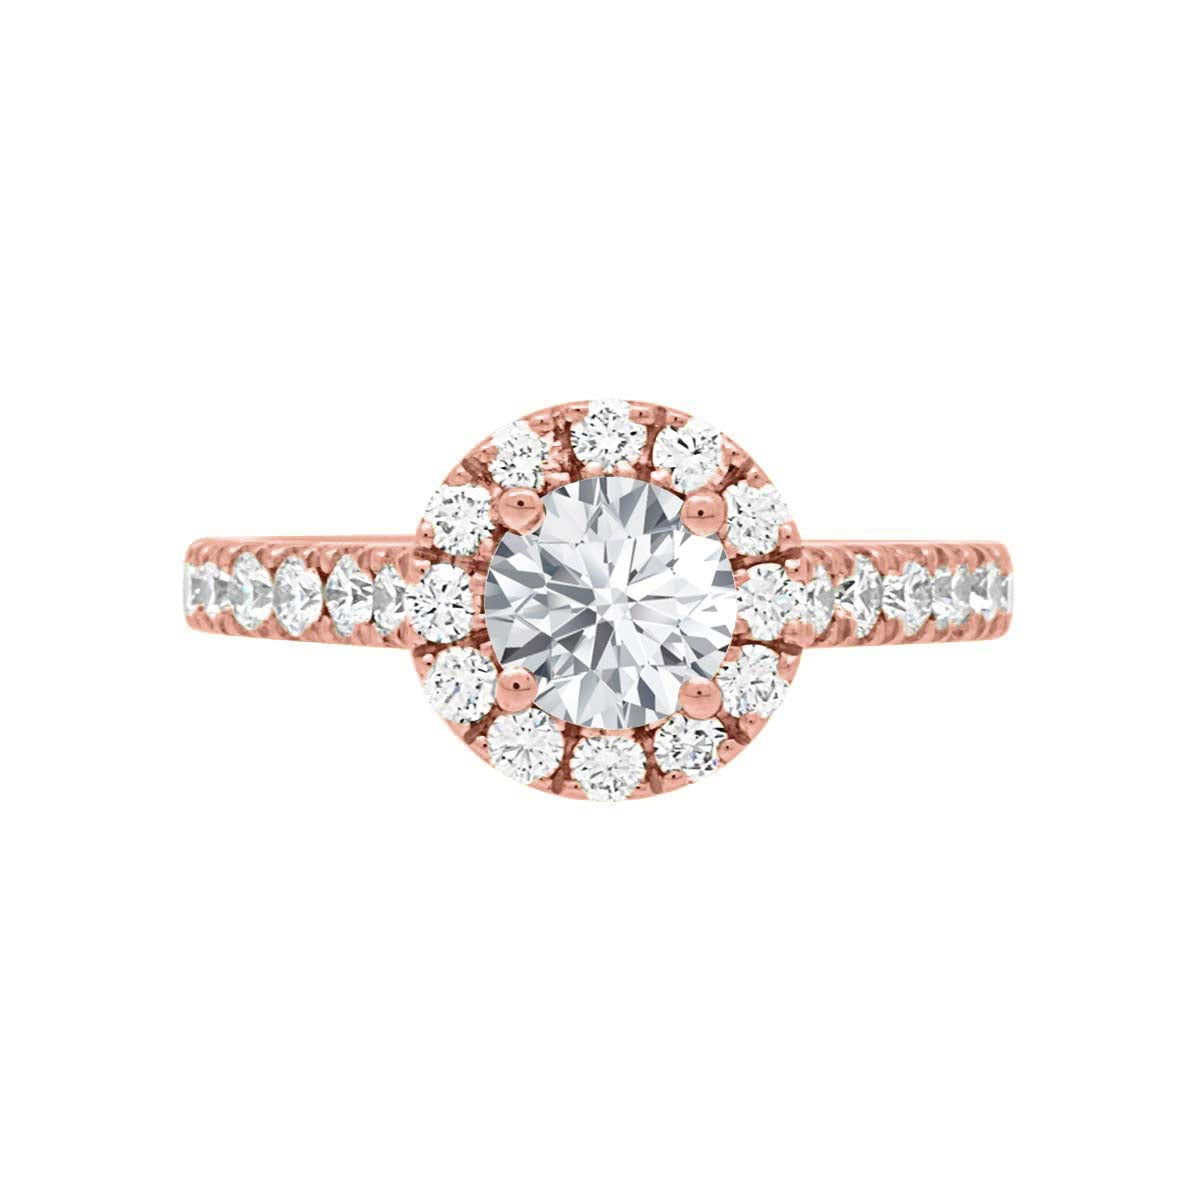 Halo Engagement Ring Diamond Band in rose gold 